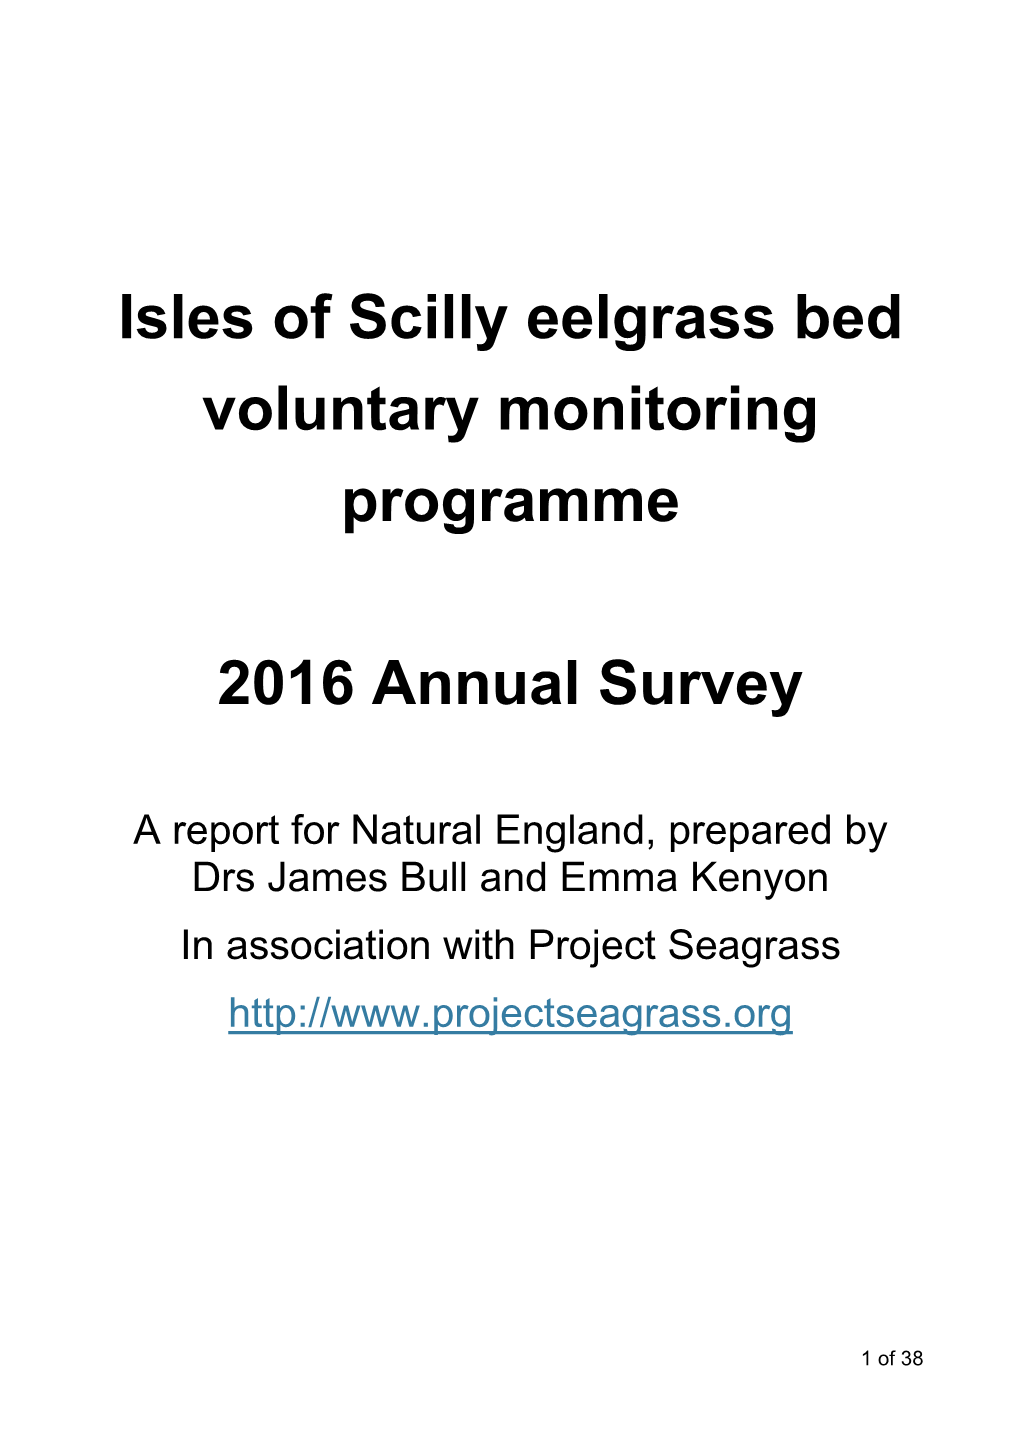 Isles of Scilly Eelgrass Bed Voluntary Monitoring Programme 2016